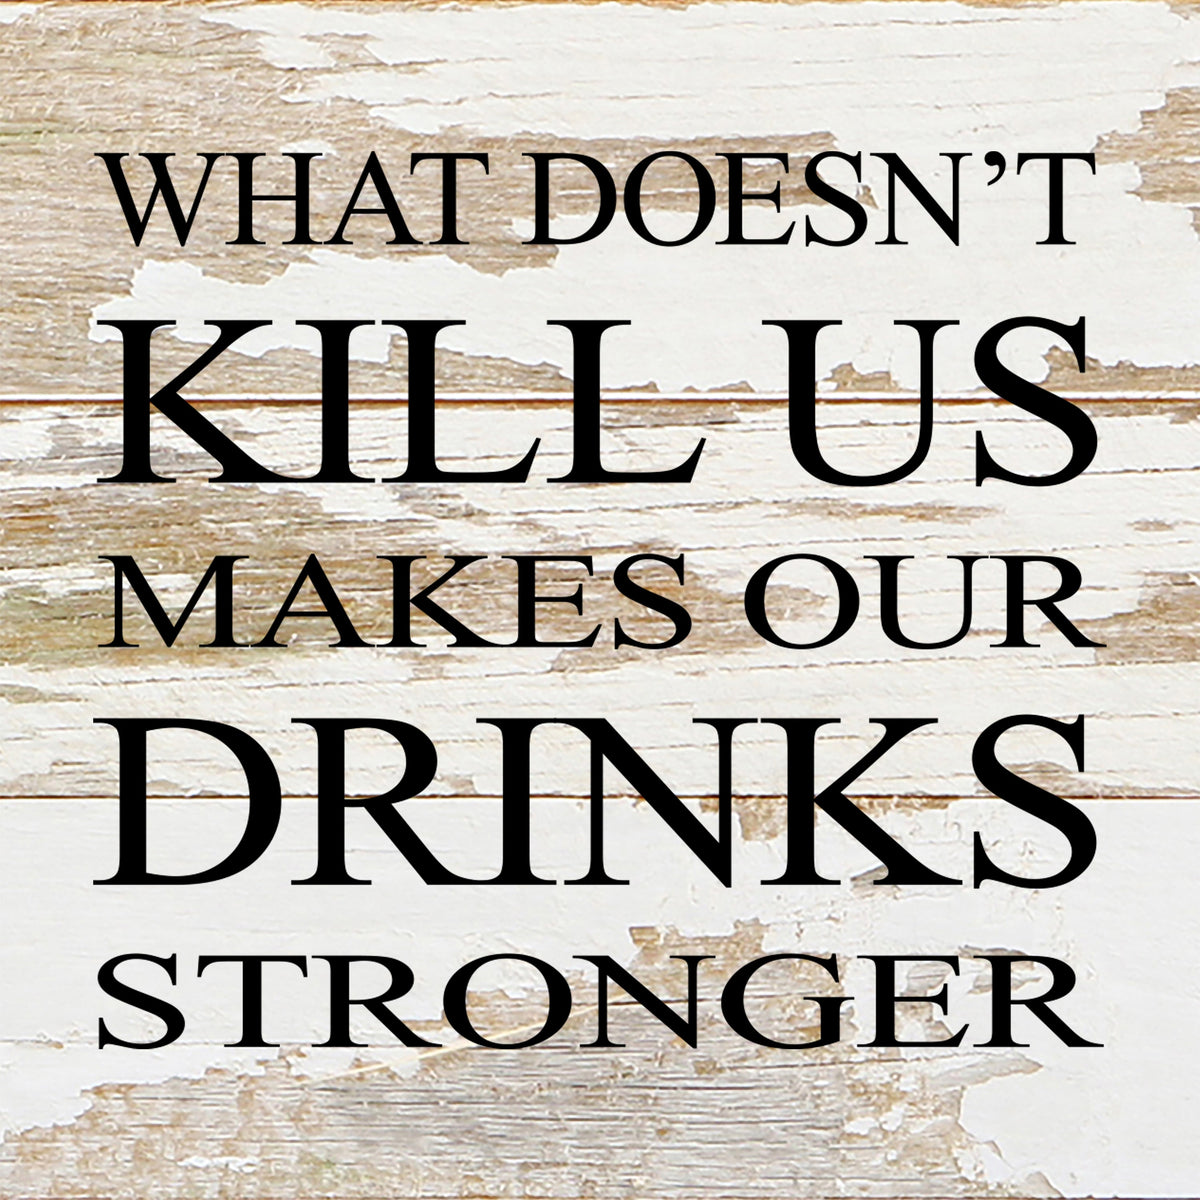 What doesn't kill us makes our drinks stronger. / 6"x6" Reclaimed Wood Sign